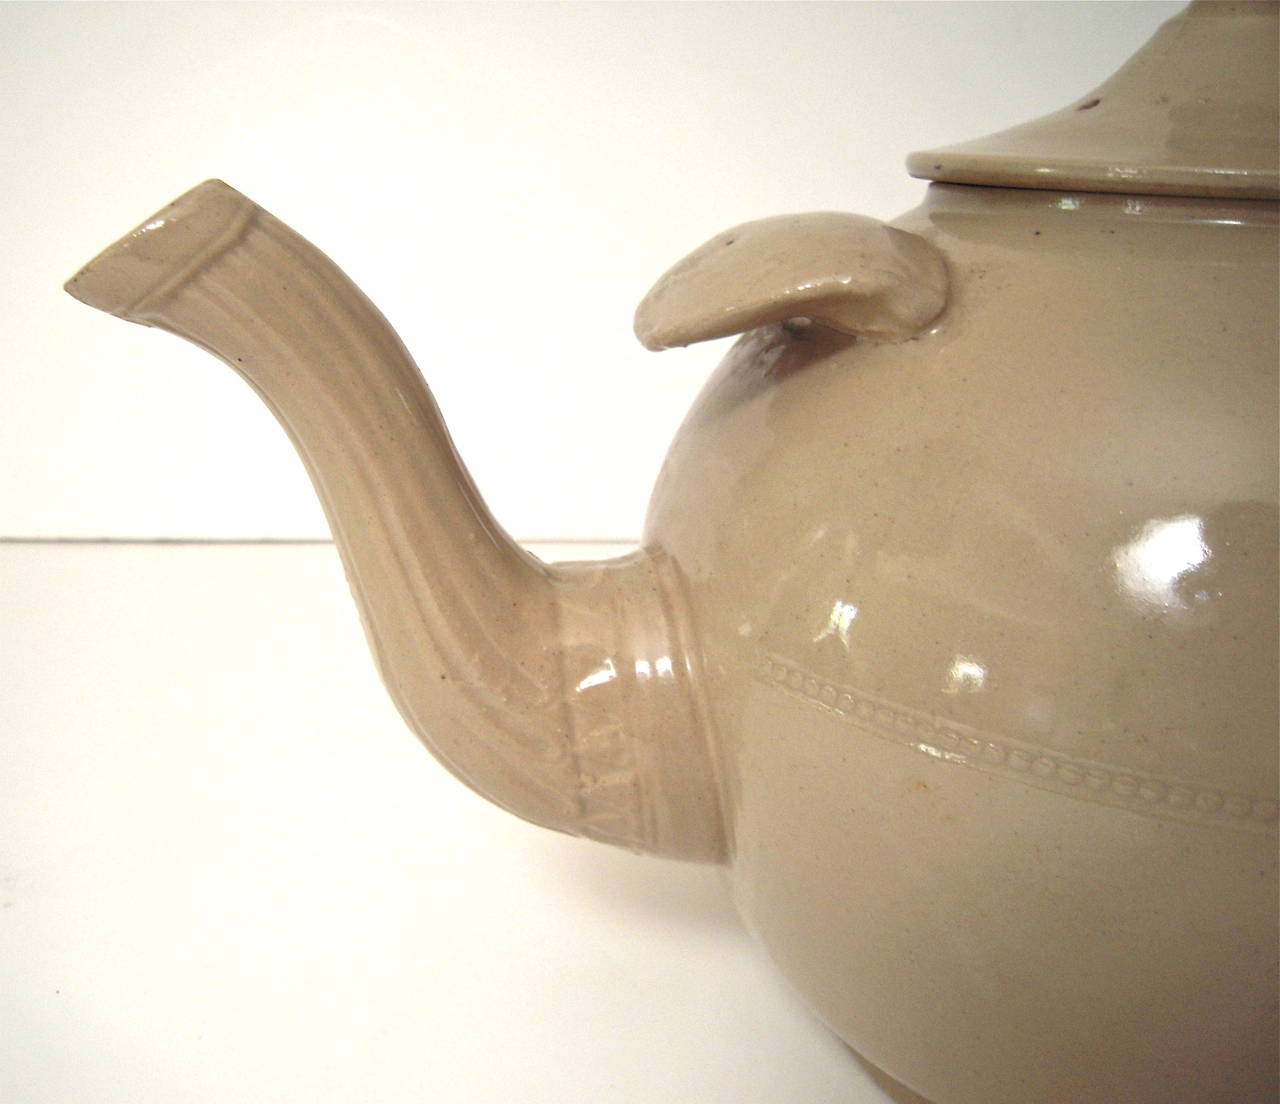 A giant, oversized stoneware teapot, or punch pot, English, circa 1880s, in glazed buff colored earthenware with impressed decorative band around the center and on the fluted spout, with substantial finger support for pouring, above the